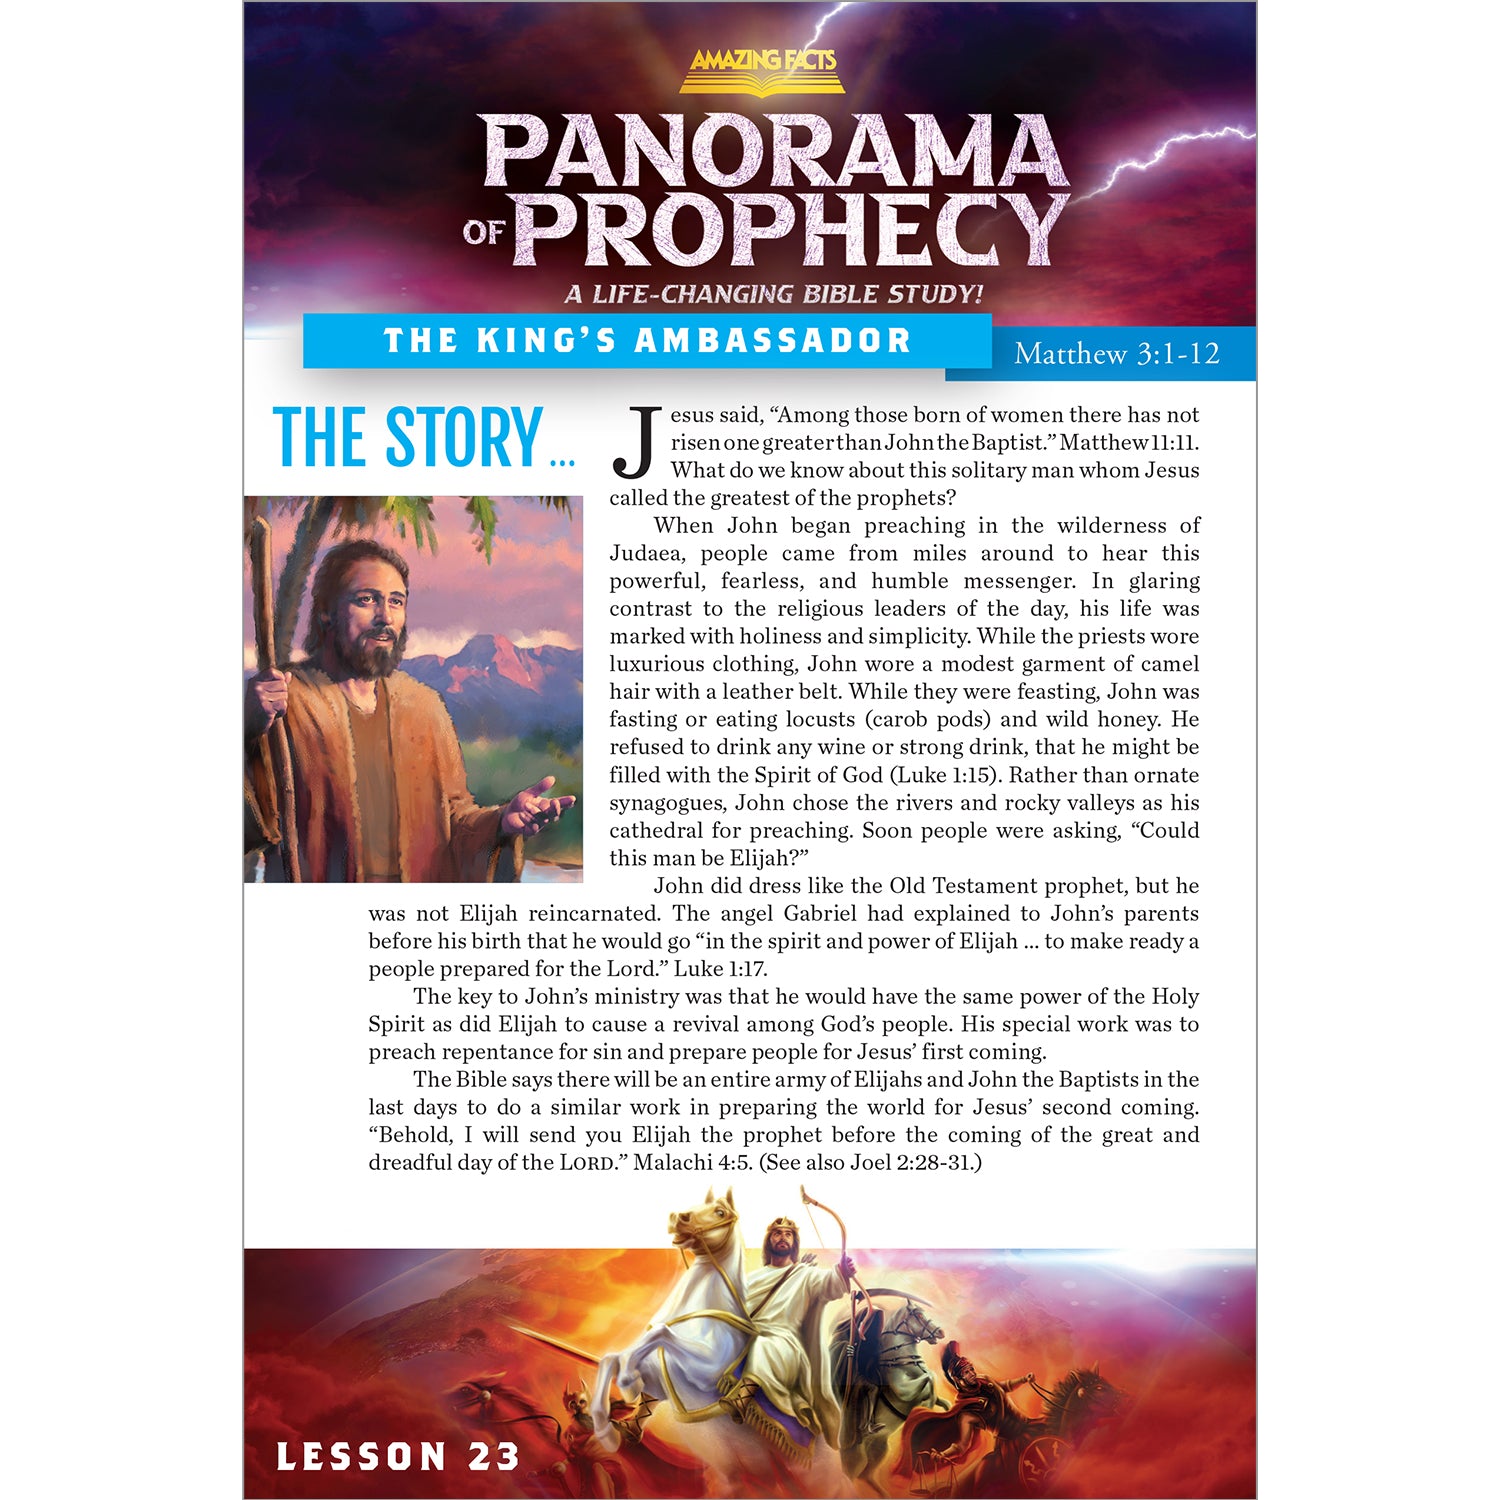 Panorama of Prophecy:  The King's Ambassador Guide 23 by Doug Batchelor